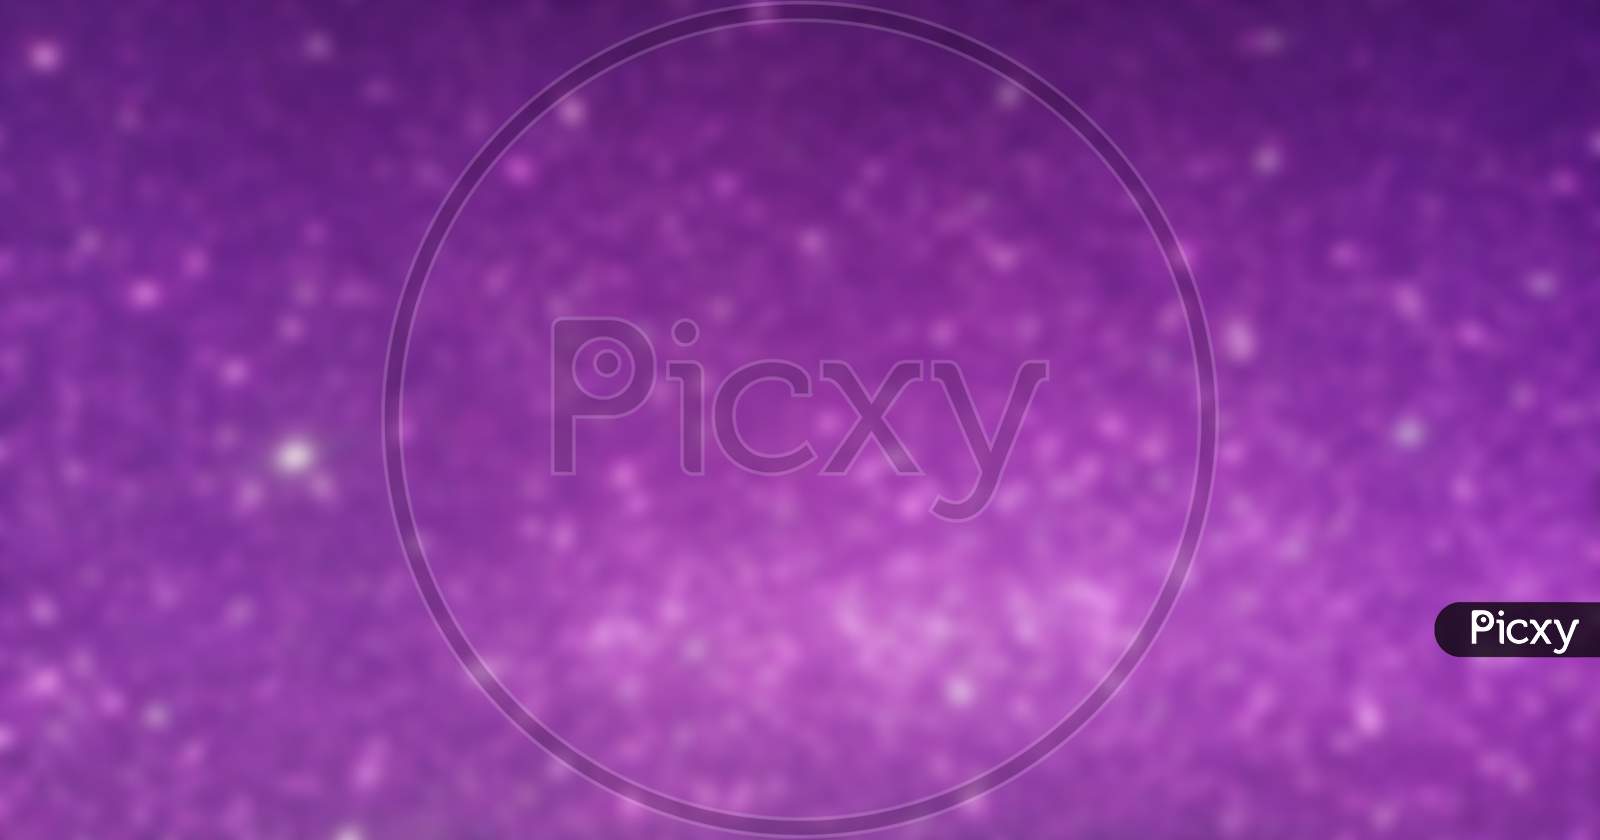 Purple abstract glitter textured background. grunge distorted decay texture background wallpaper.